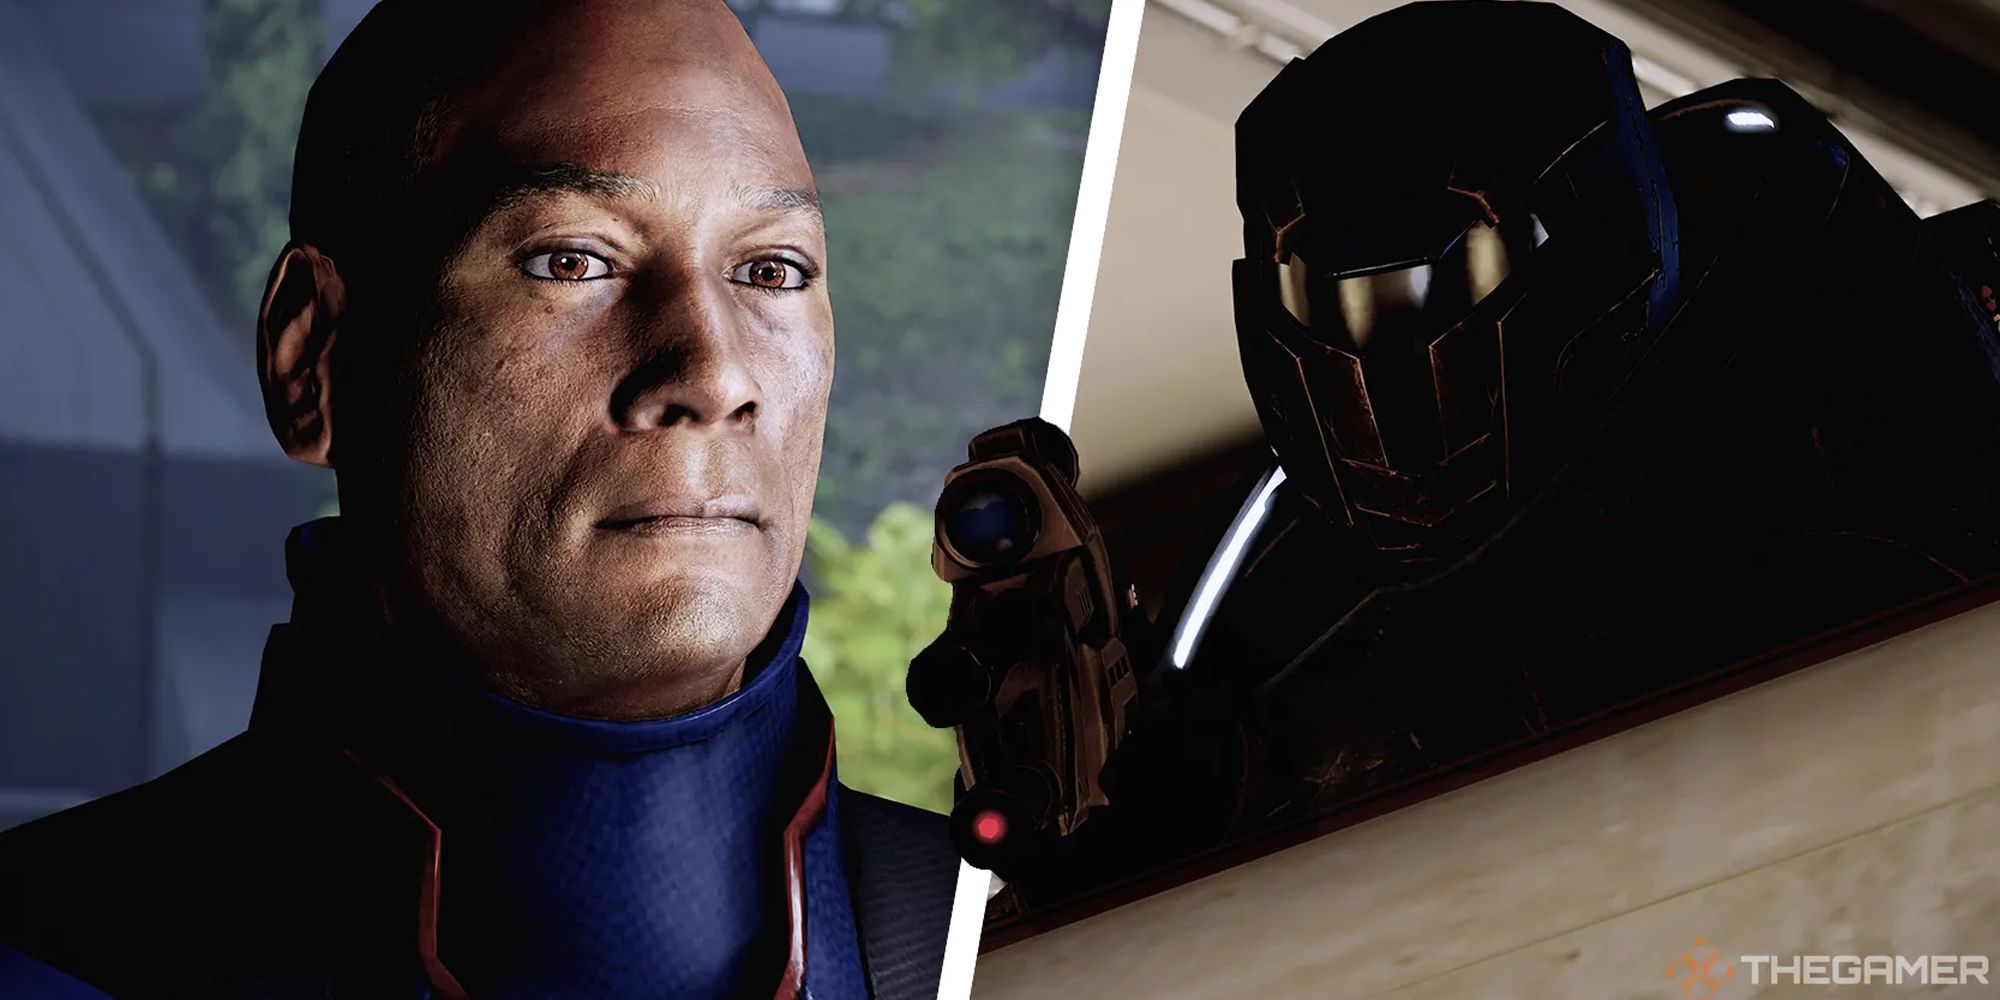 A split image of Keith and Garrus from Mass Effect 2.